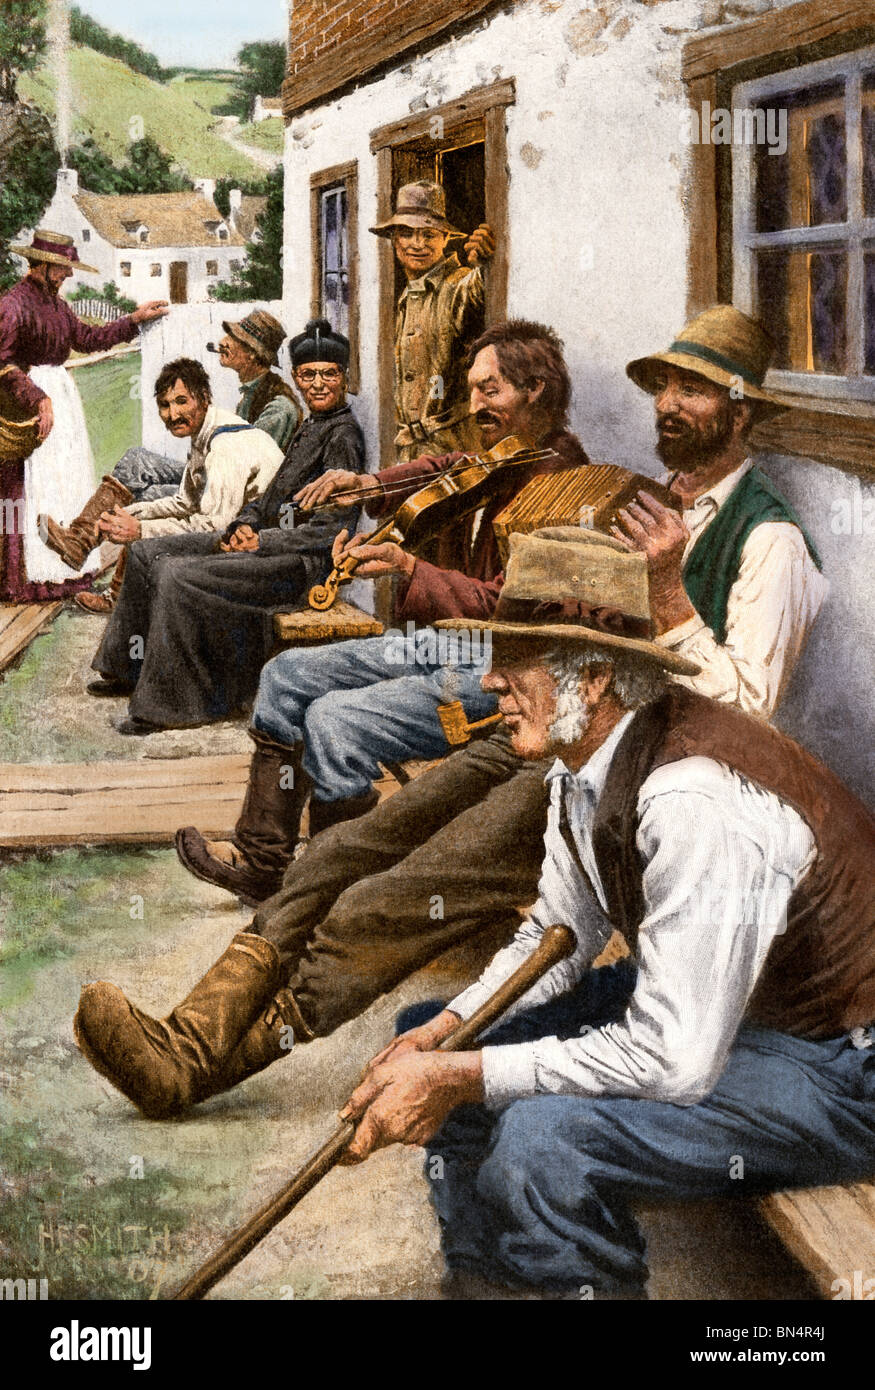 French-Canadian villagers enjoying impromptu music, circa 1900. Color halftone of an illustration Stock Photo